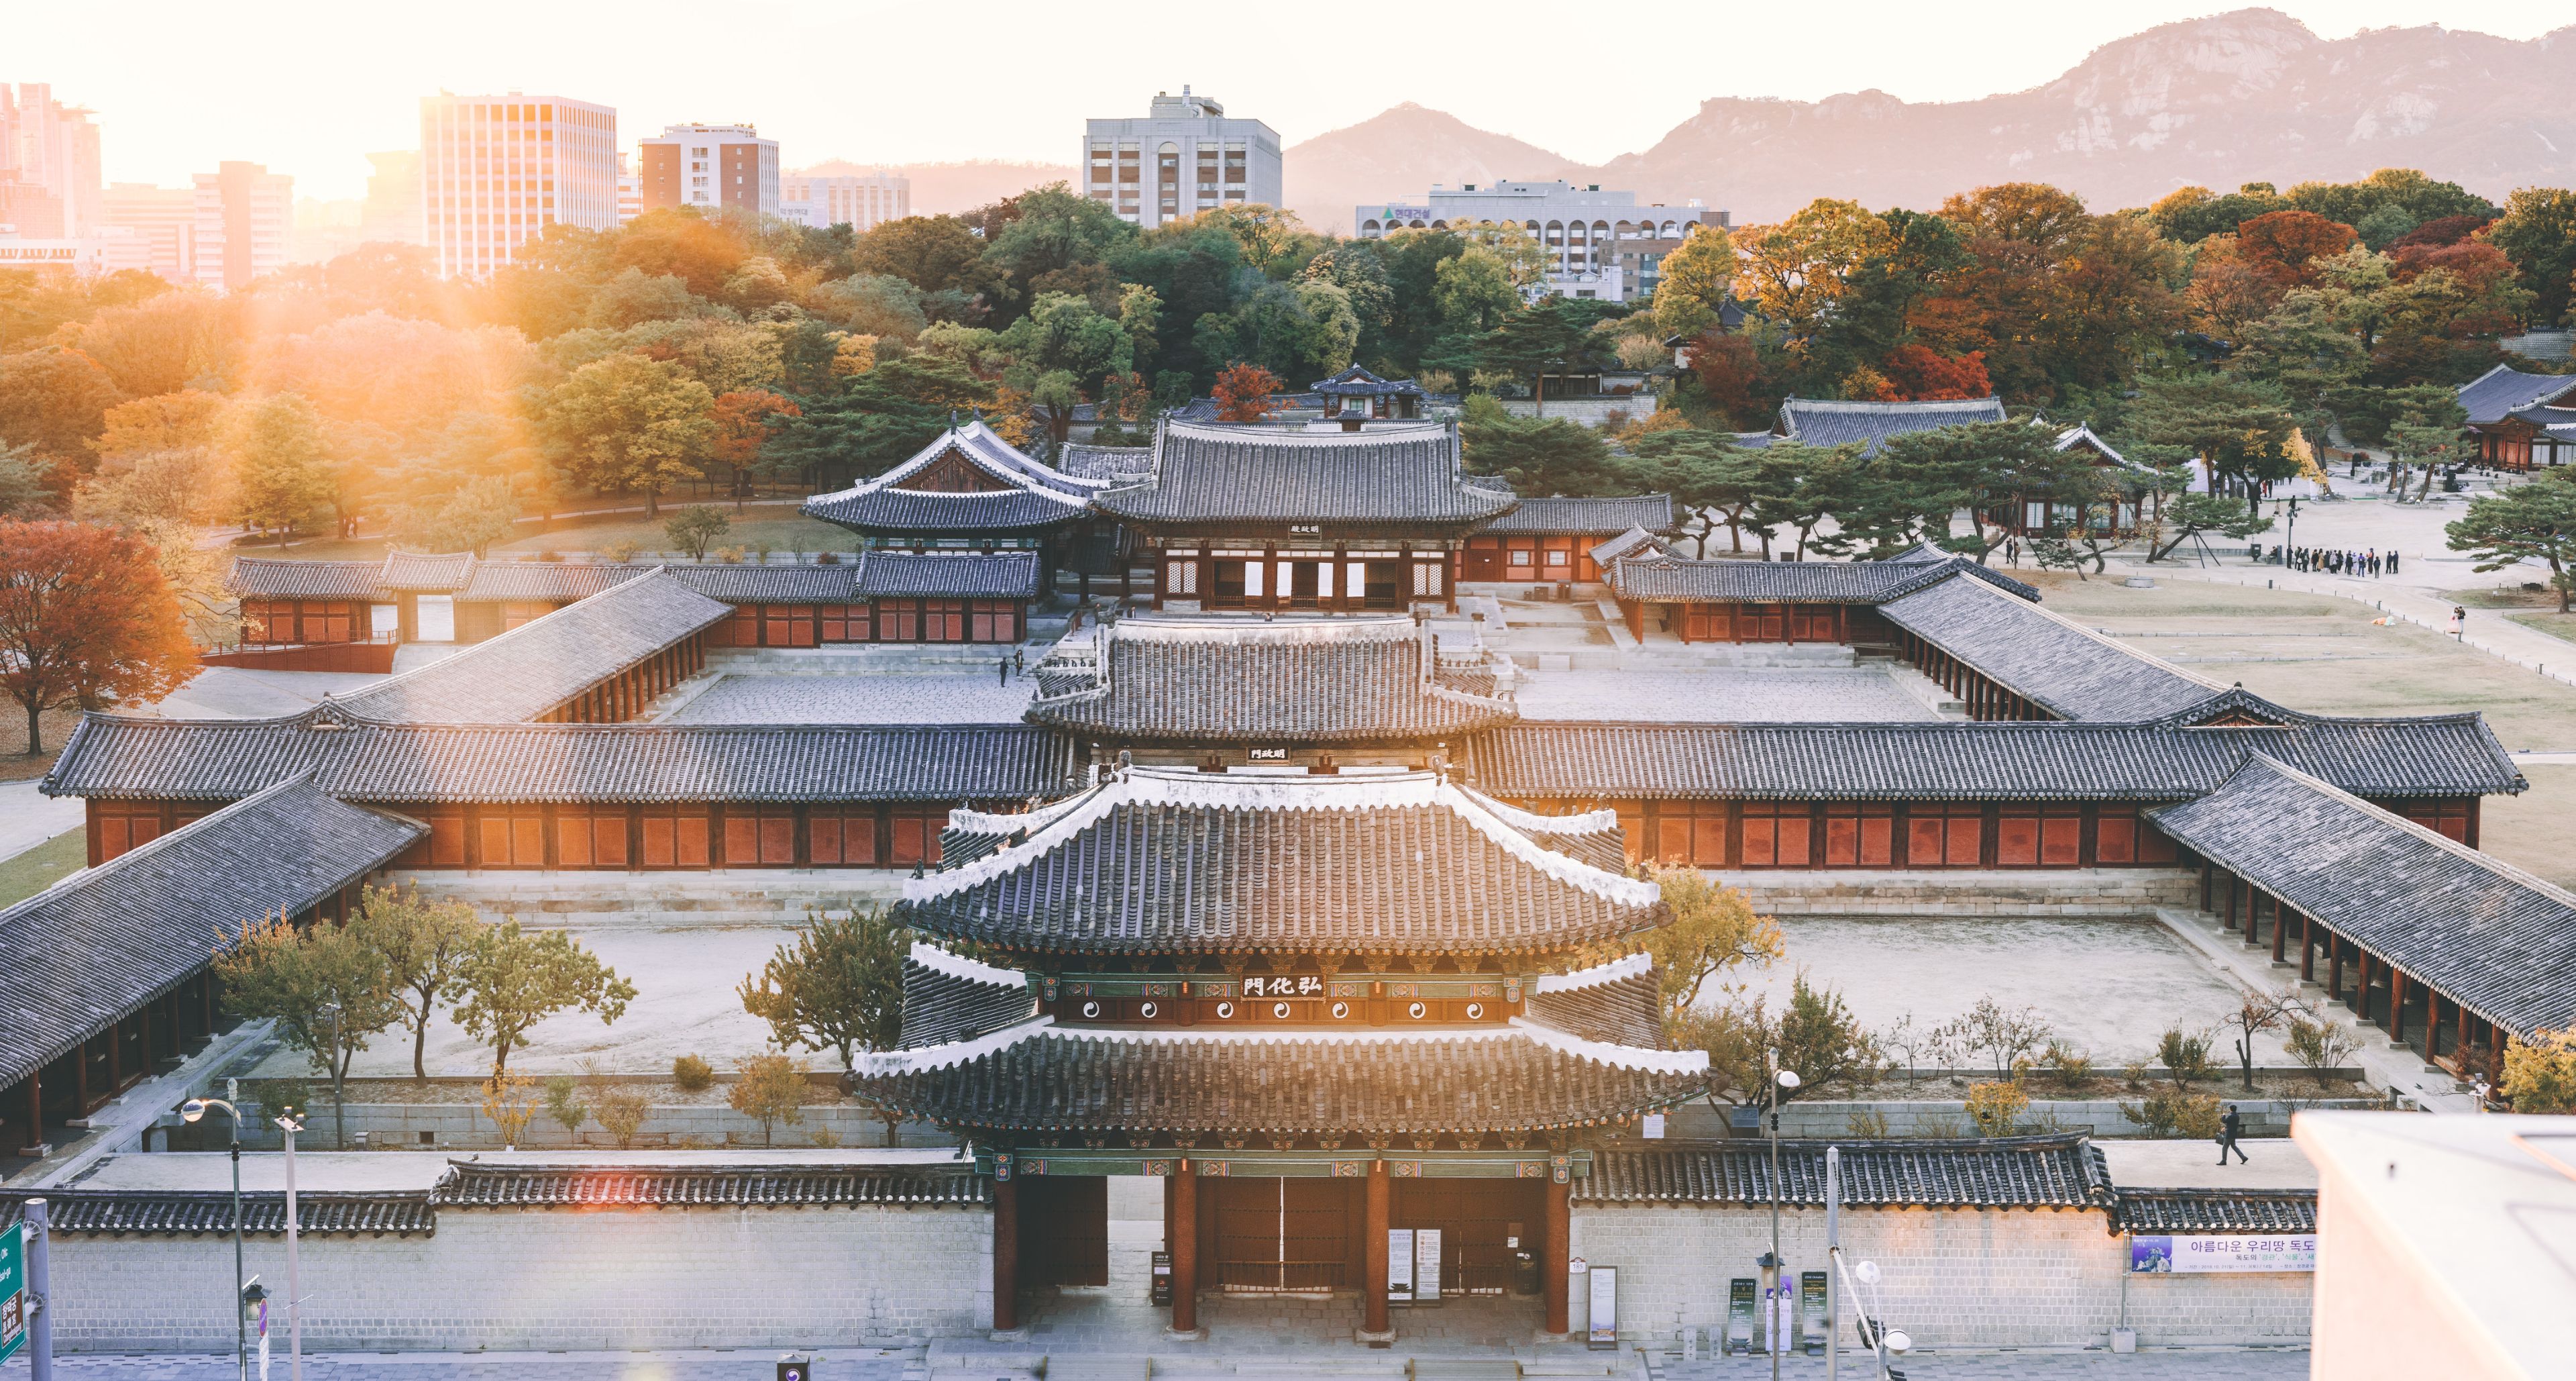 A palace in South Korea